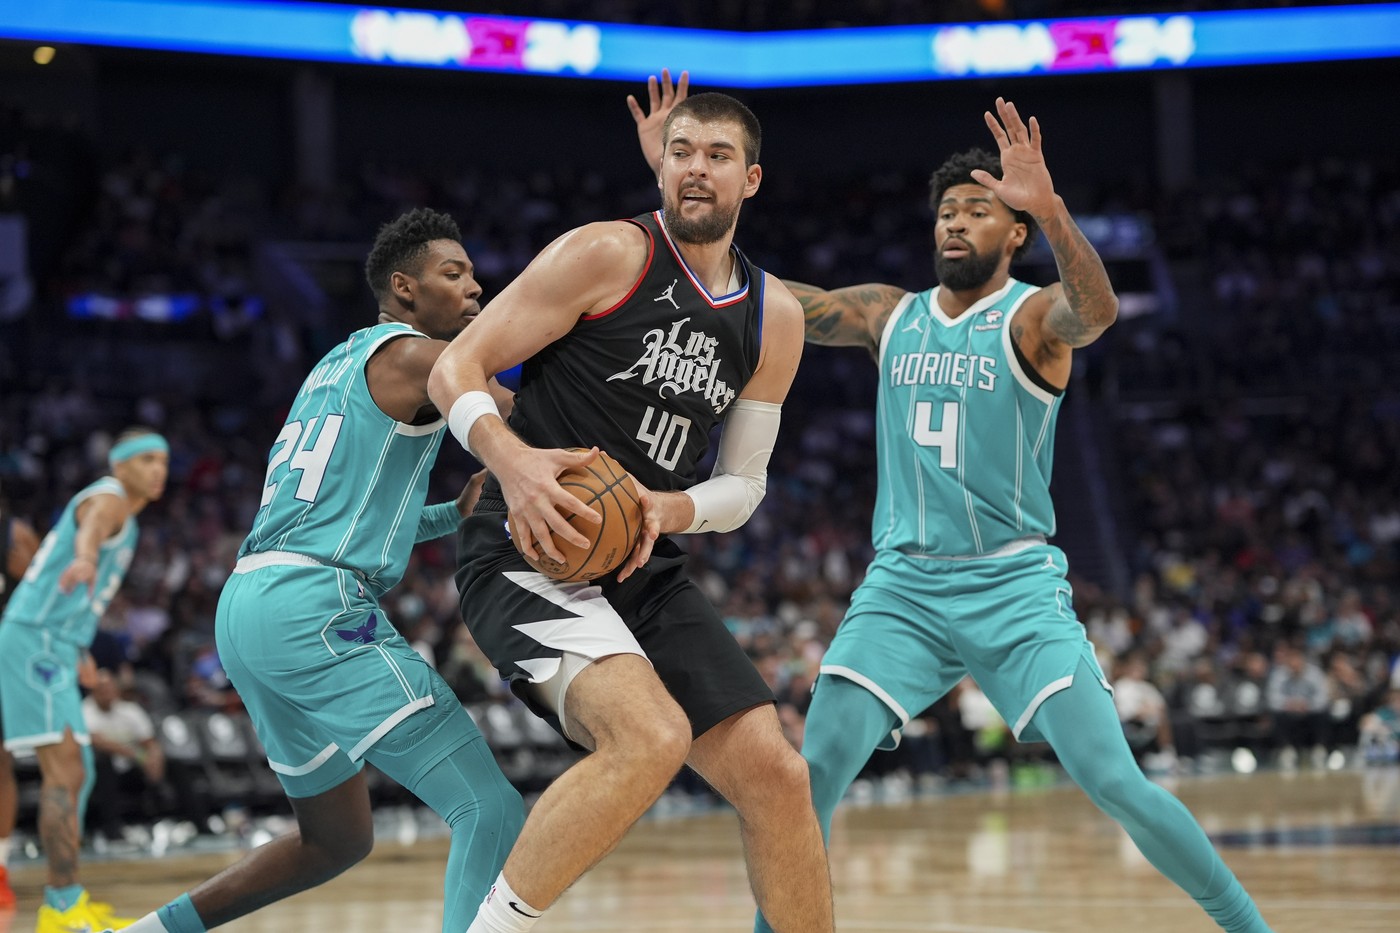 Mar 31, 2024; Charlotte, North Carolina, USA; LA Clippers center Ivica Zubac (40) turns away from pressure from Charlotte Hornets center Nick Richards (4) and forward Brandon Miller (24) during the second half at Spectrum Center.,Image: 861470841, License: Rights-managed, Restrictions: , Model Release: no, Credit line: USA TODAY Sports / ddp USA / Profimedia